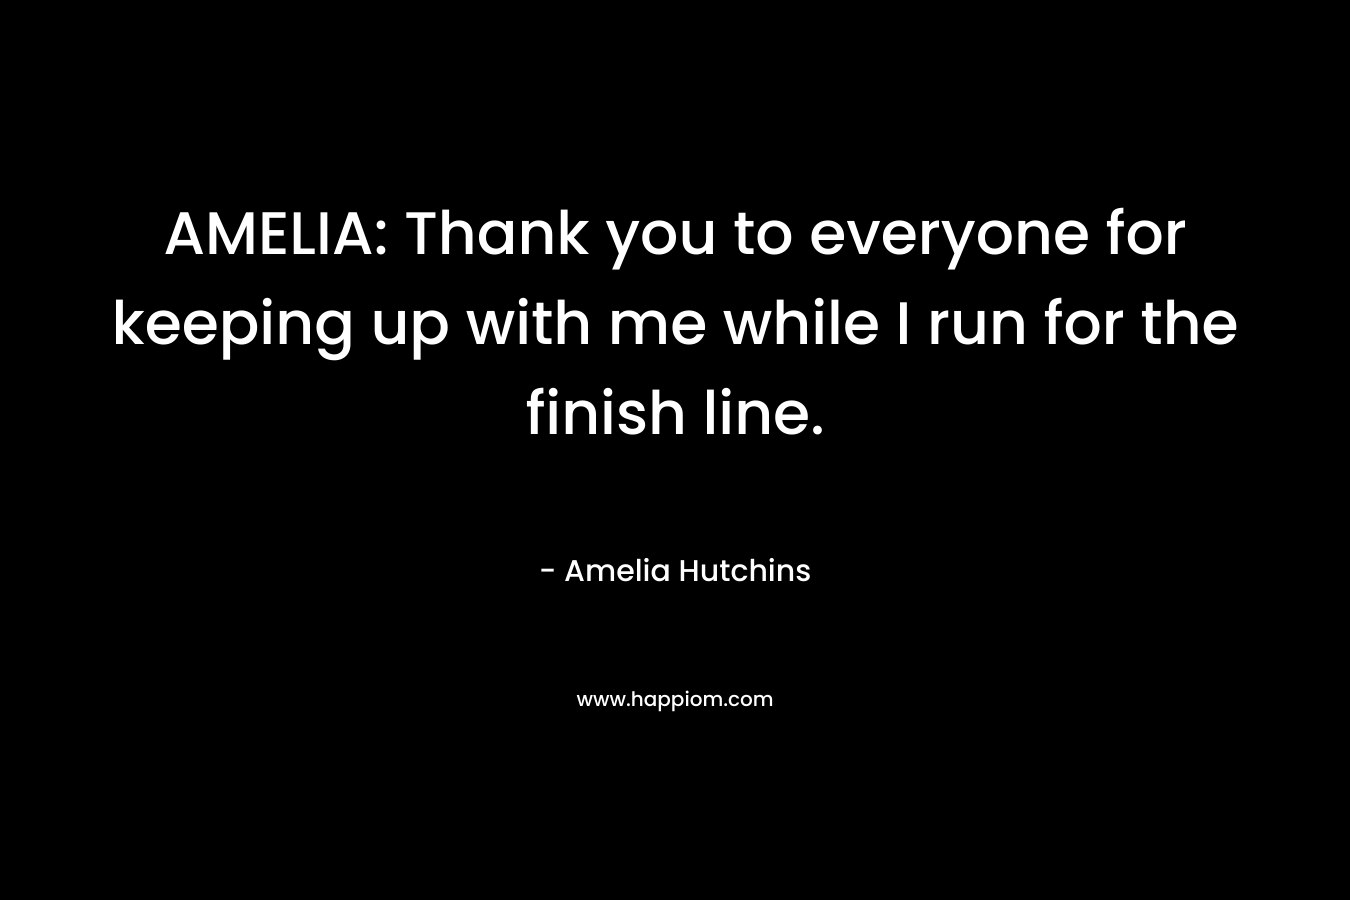 AMELIA: Thank you to everyone for keeping up with me while I run for the finish line. – Amelia Hutchins